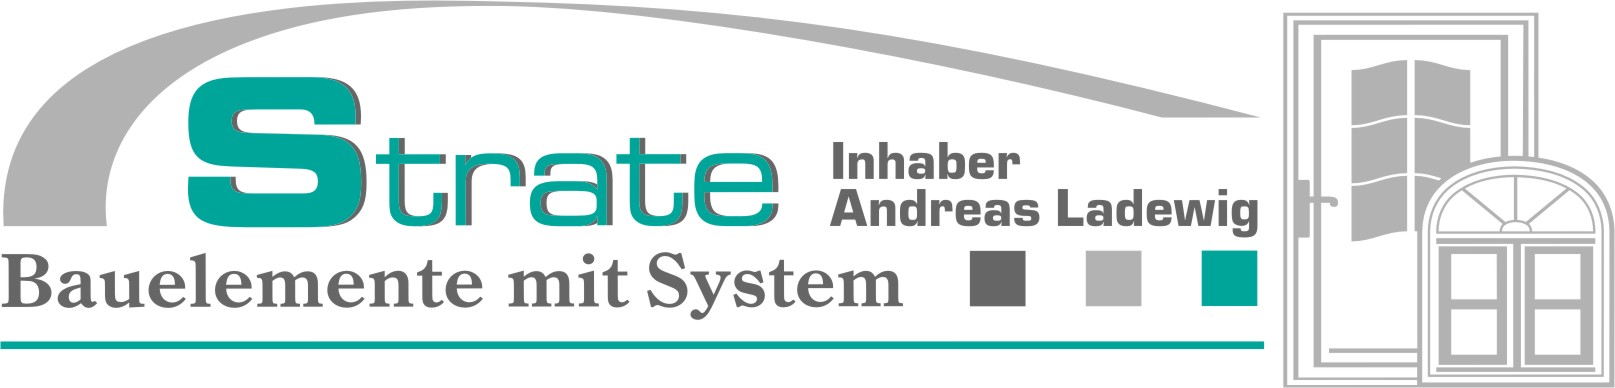 AXEL STRATE e.K. Bauelemente mit System